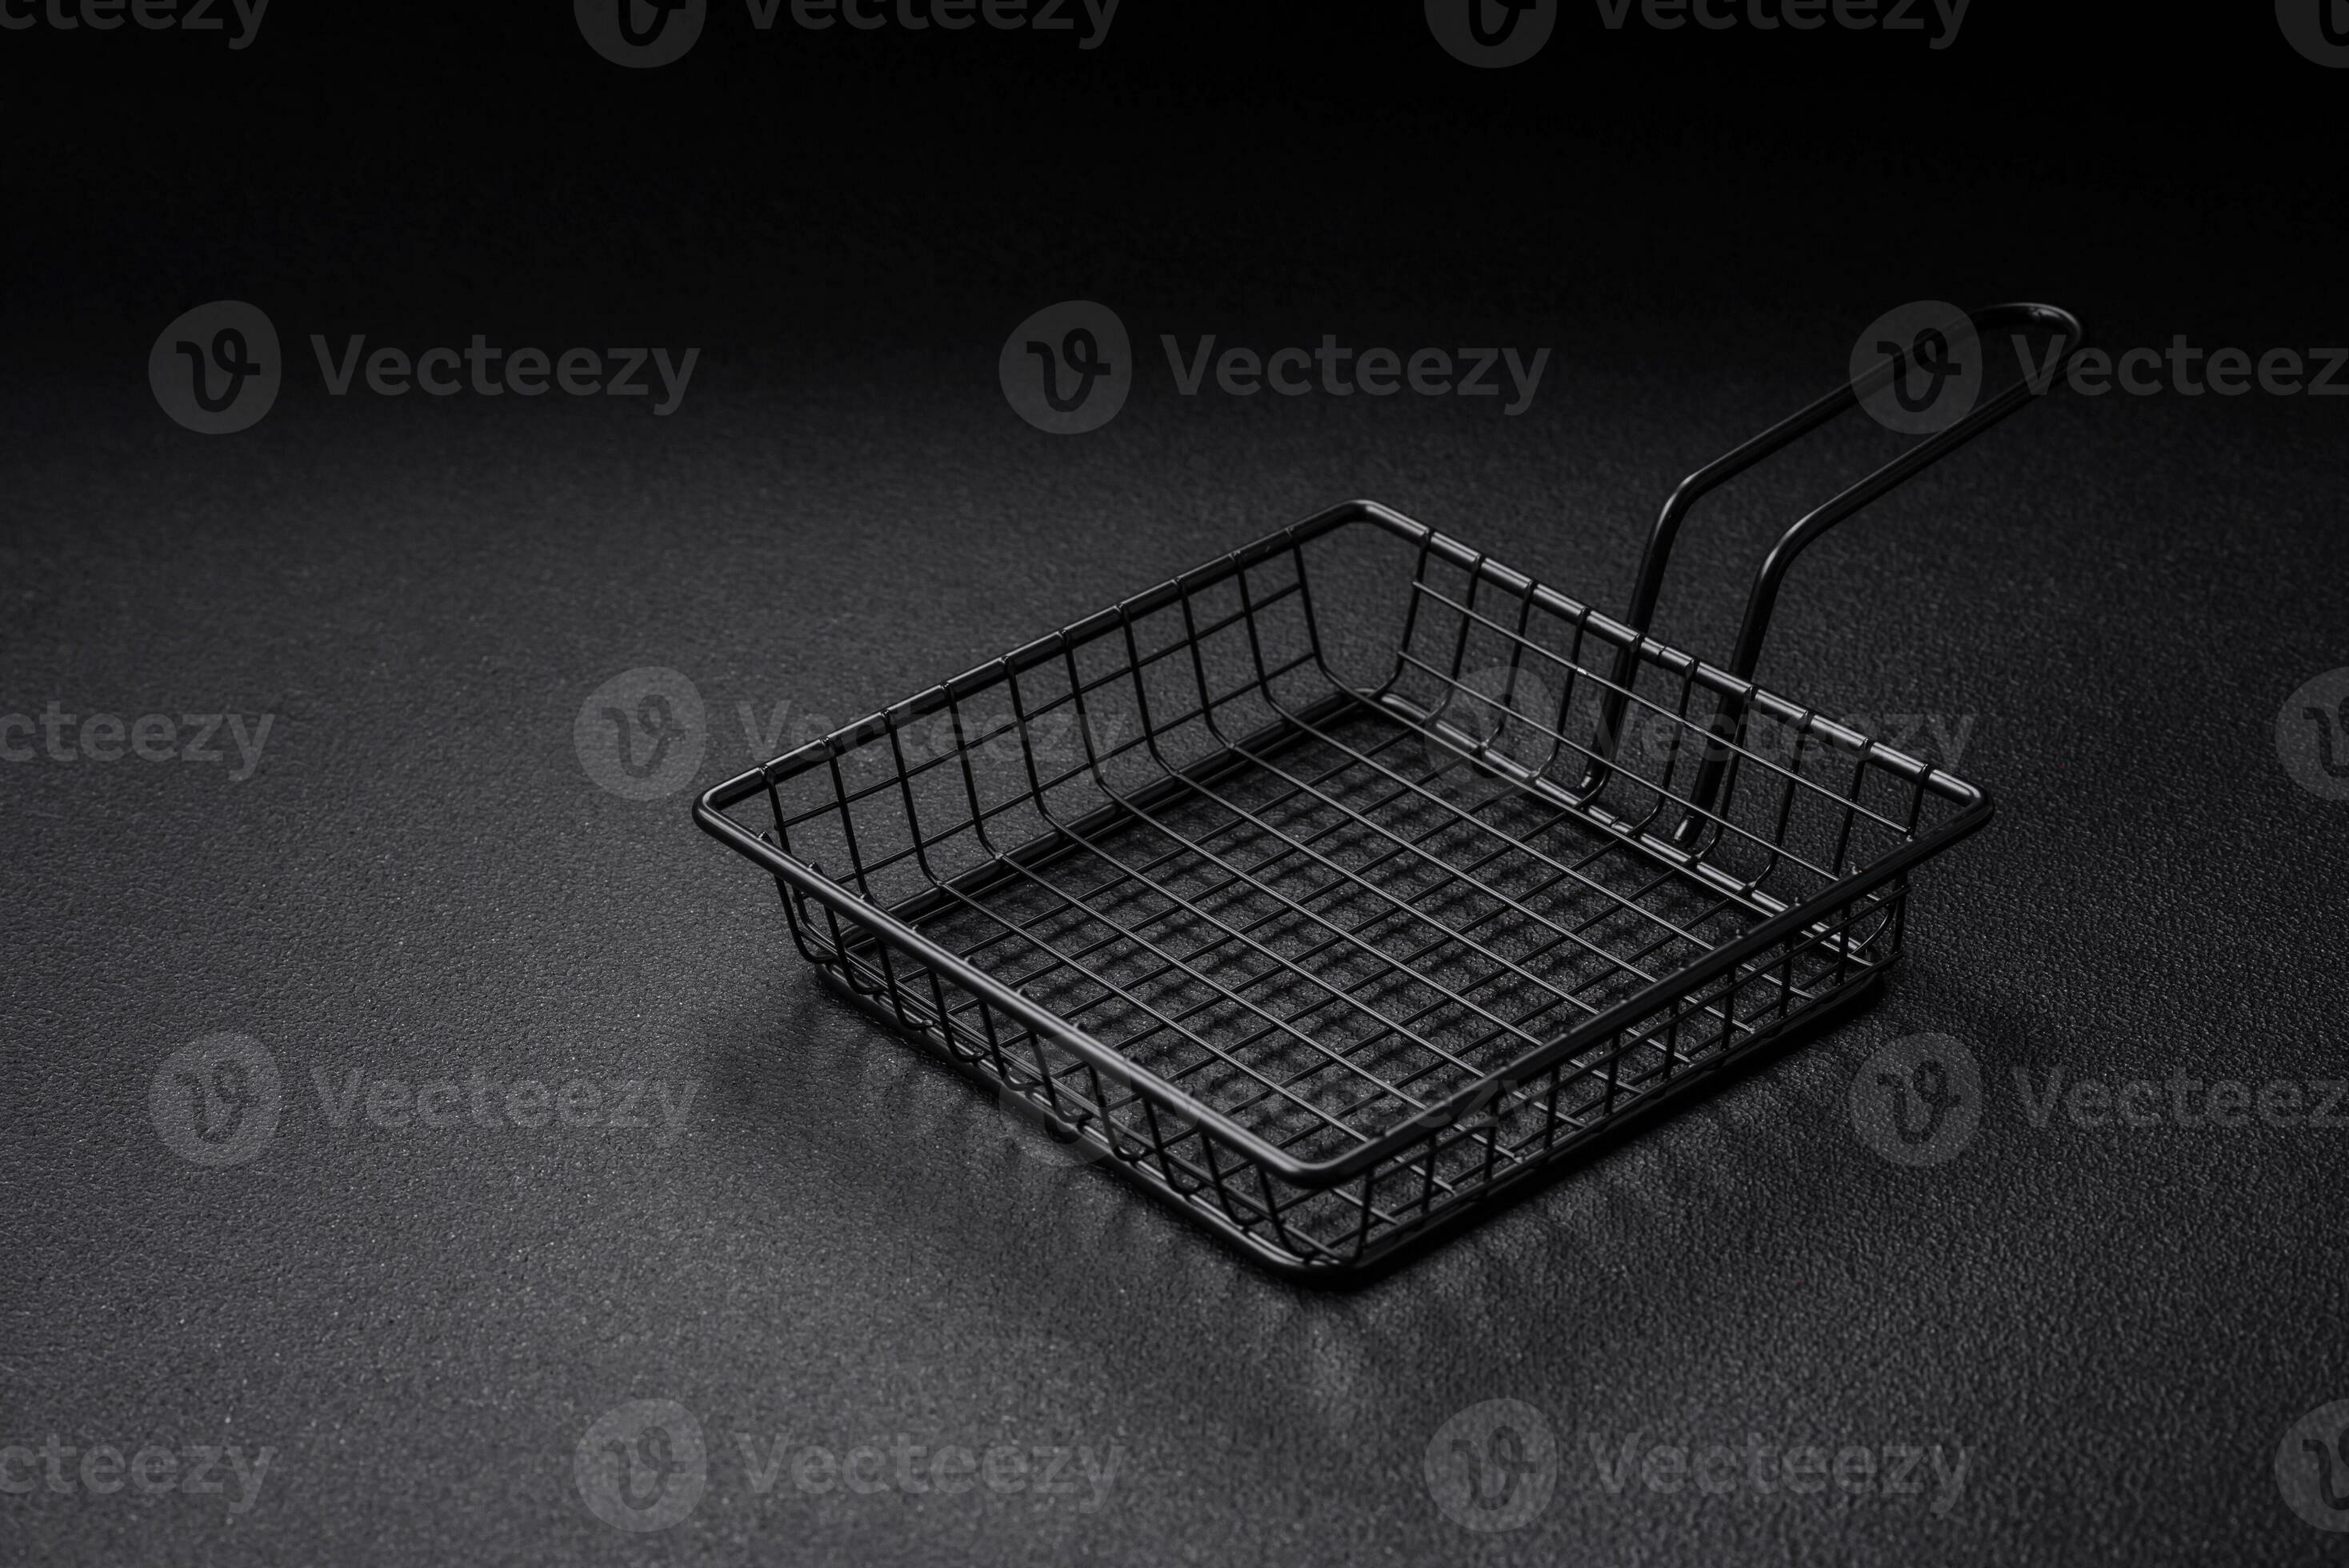 https://static.vecteezy.com/system/resources/previews/031/423/782/large_2x/a-black-mesh-or-basket-for-deep-frying-and-cooking-potatoes-in-boiling-oil-photo.jpg